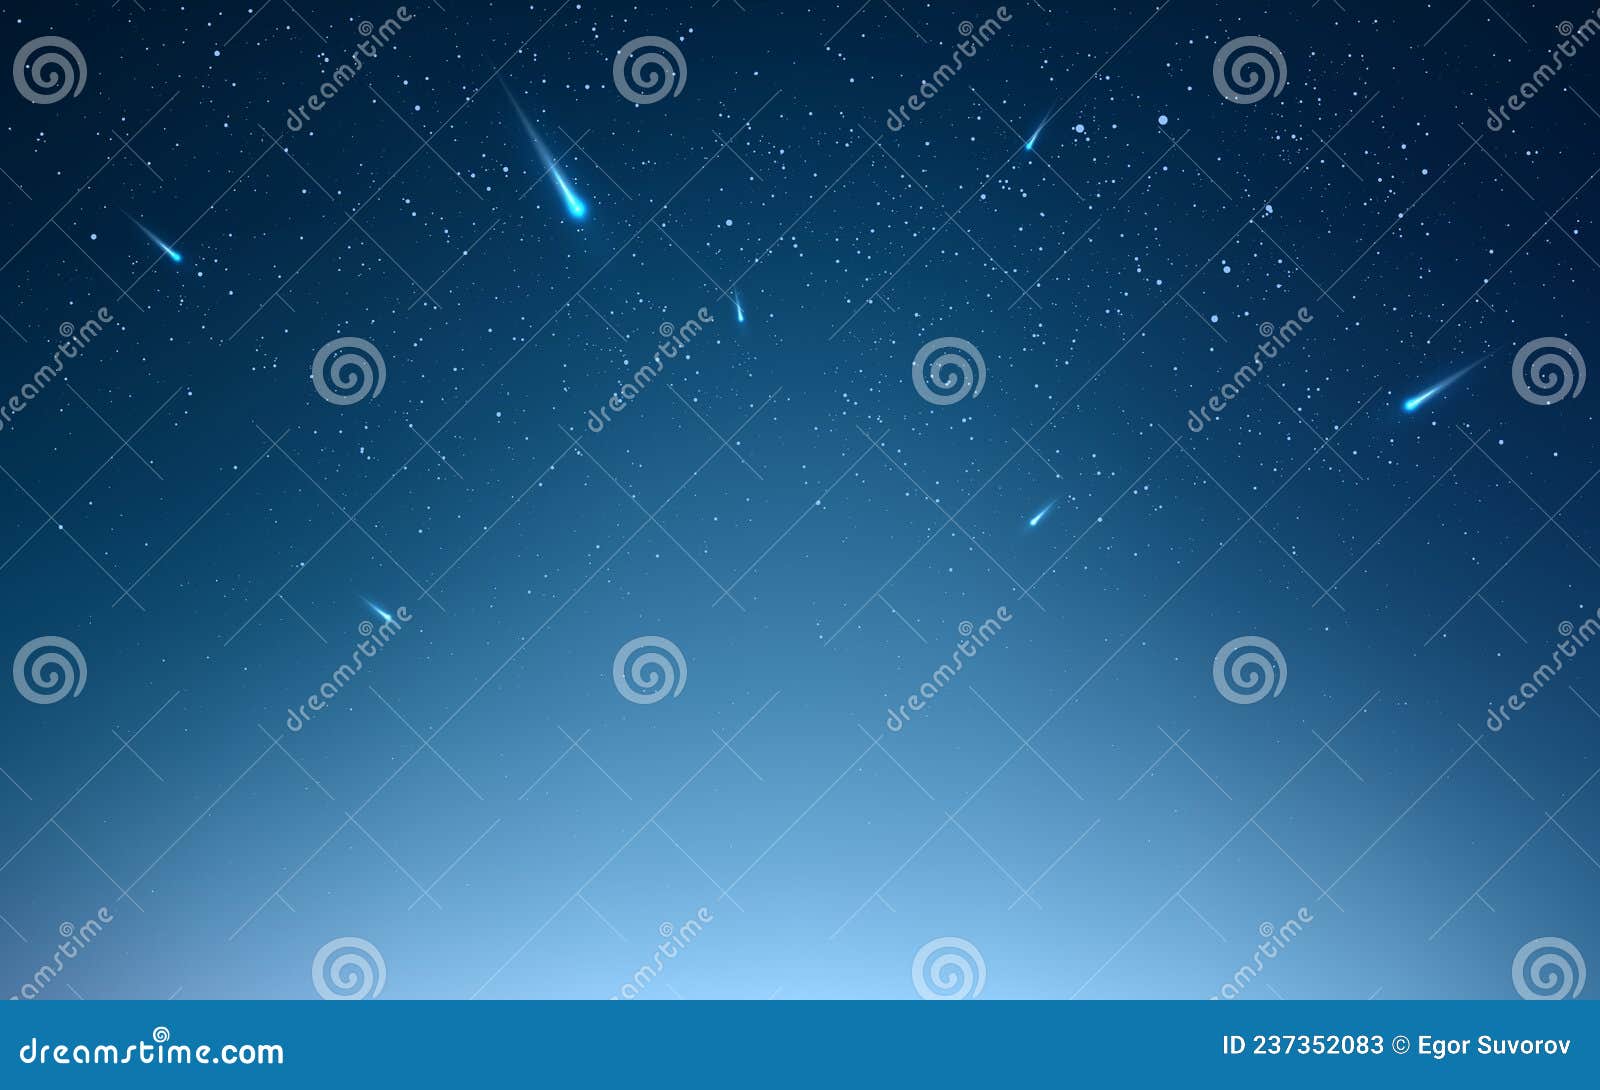 shooting stars. night sky with falling meteorites. blue starry space. cosmos backdrop with glowing trail. cosmic banner